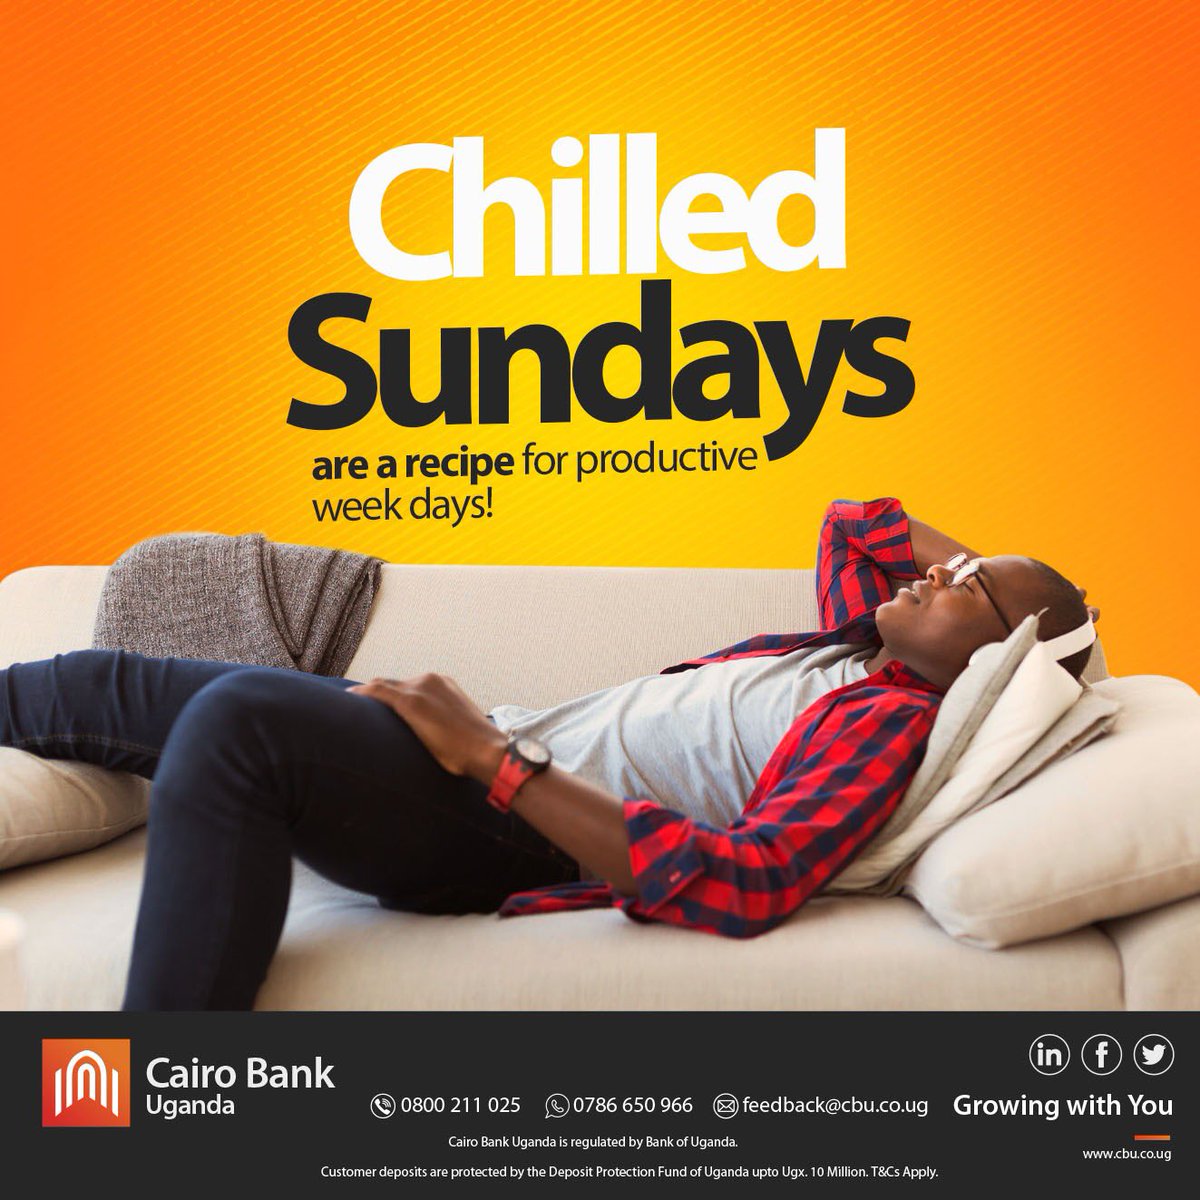 Chilled Sundays!

Take some time off. It works like magic for productive week days ahead!

#CairoBank #ChilledSundays #BBTitans #BBTitians2023 #BBTitians #funsunday #SundayFunday #SundayBrunch #SundayService